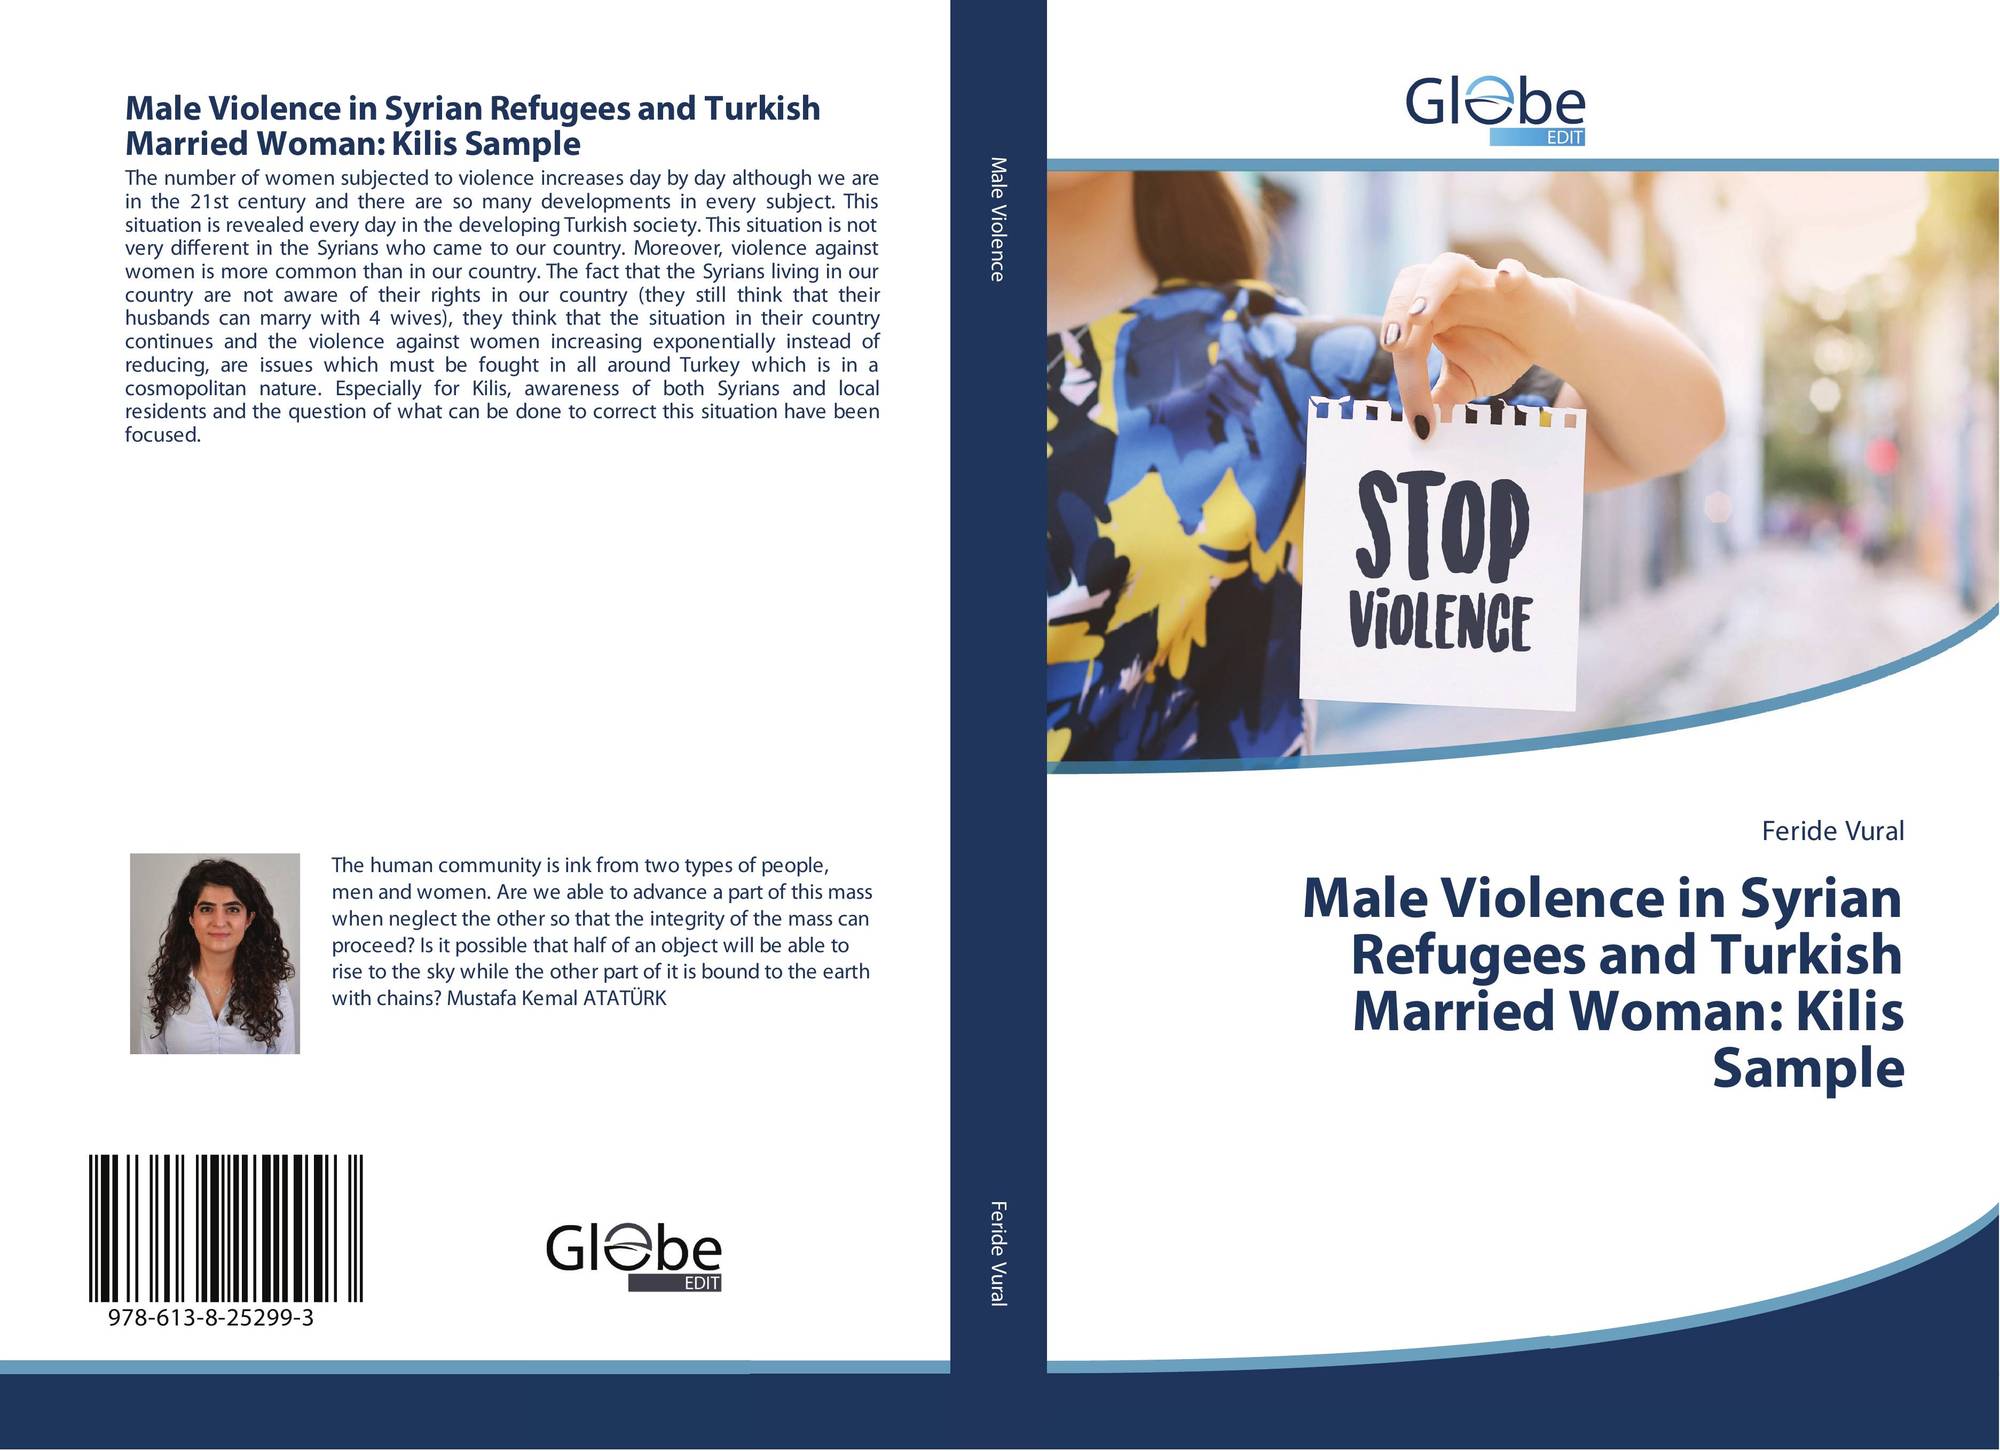 Samples of Woman in Globe Logo - Male Violence in Syrian Refugees and Turkish Married Woman: Kilis